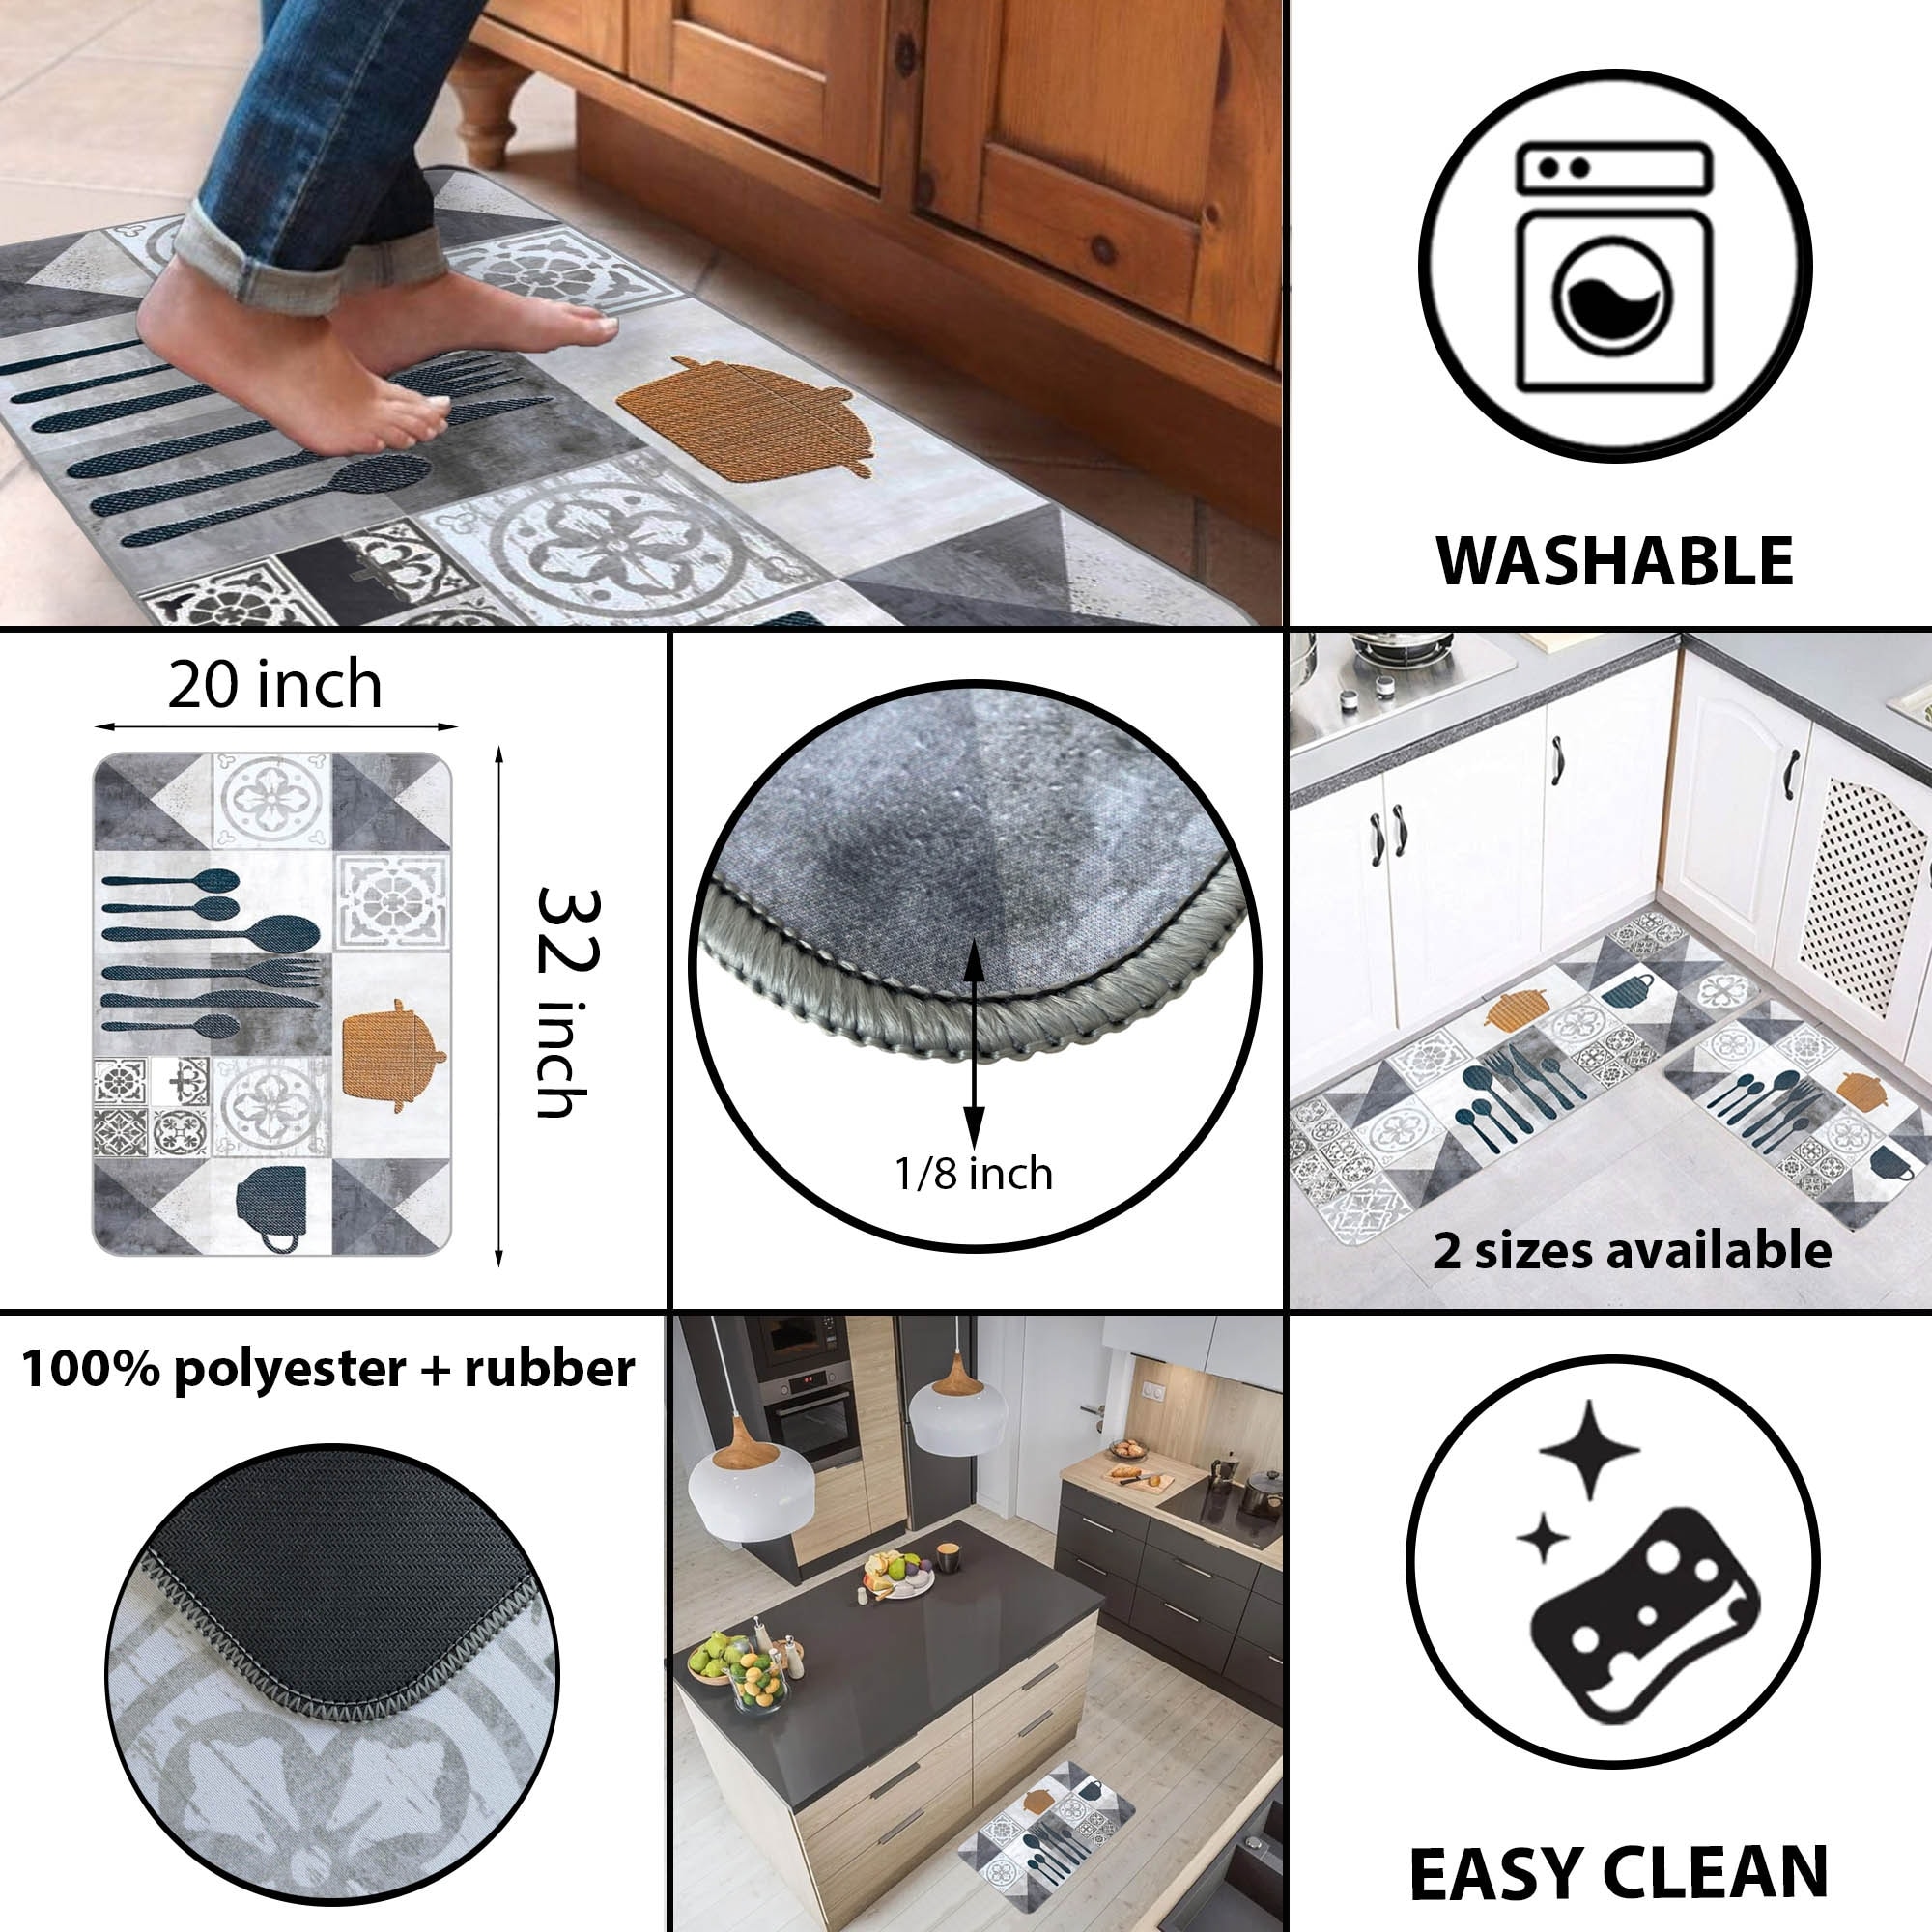 https://ak1.ostkcdn.com/images/products/is/images/direct/1b96e4c3680103e64e4c77907d0ed1544f42f987/Cutlery-Anti-Fatigue-Kitchen-Floor-Mat-or-Runner.jpg